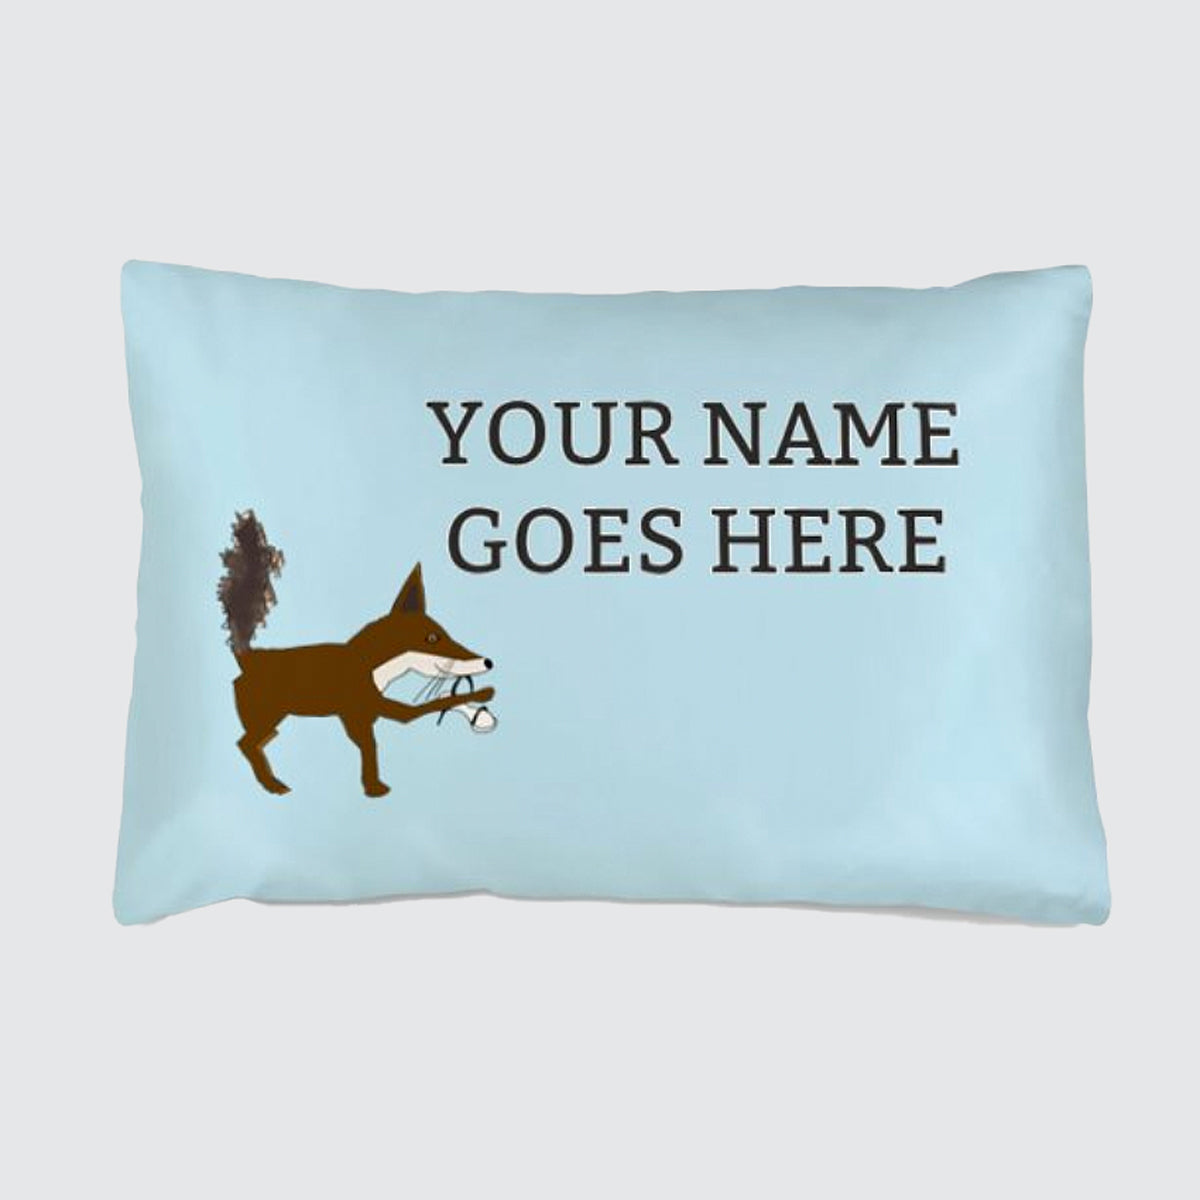 Silk Pillowcase for Children - Personalised - Foxy the Fox on Pale Blue